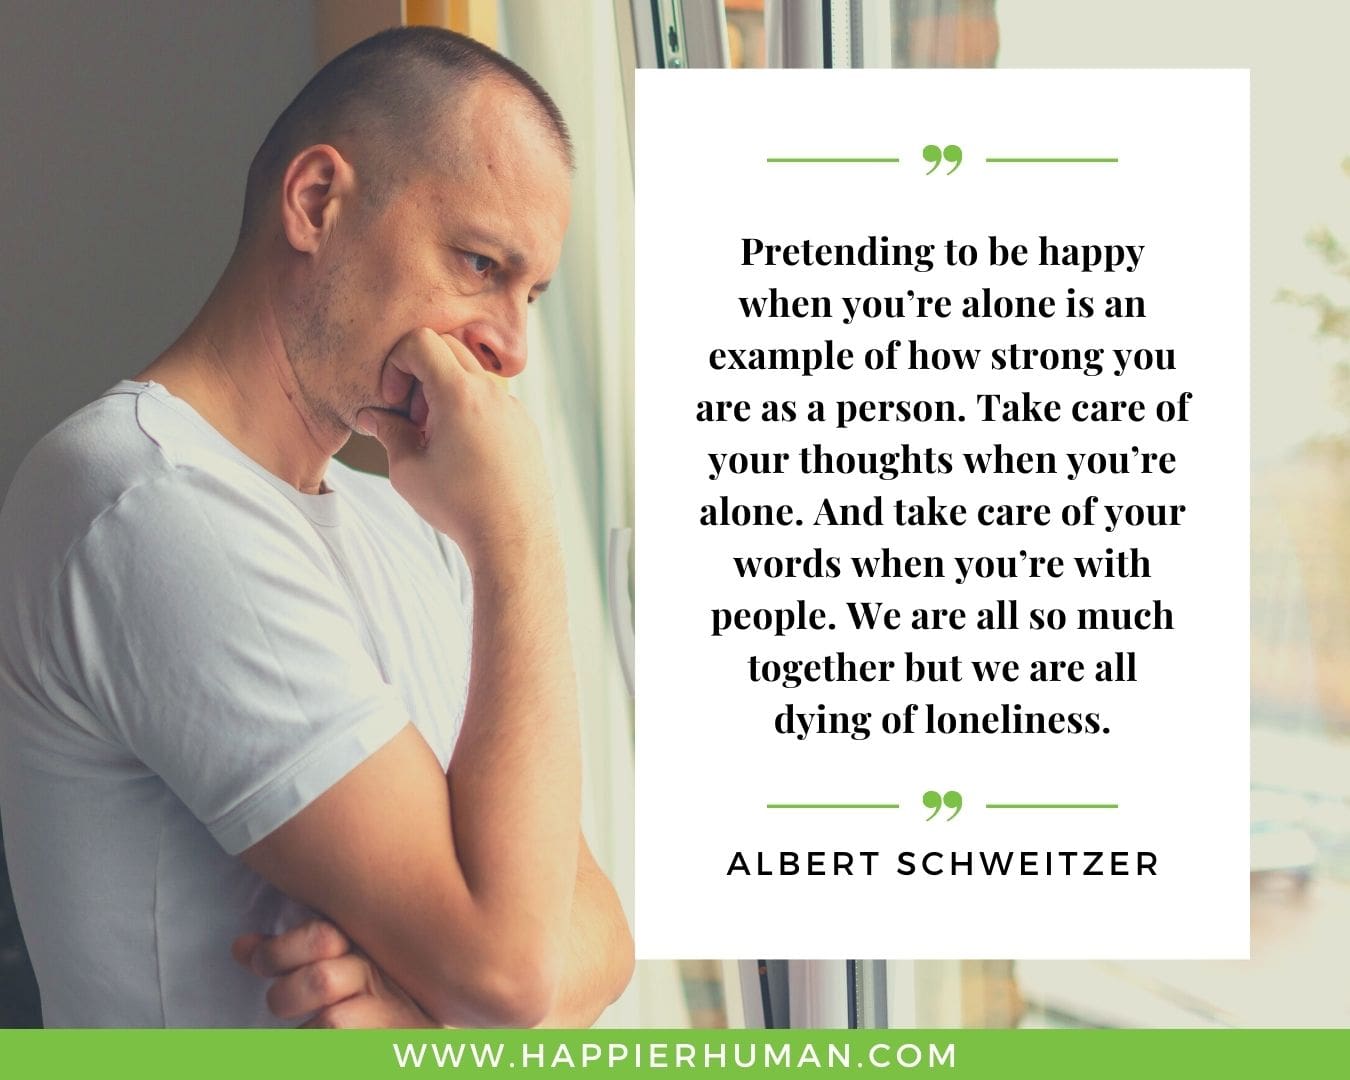 Loneliness Quotes - “Pretending to be happy when you’re alone is an example of how strong you are as a person. Take care of your thoughts when you’re alone. And take care of your words when you’re with people. We are all so much together but we are all dying of loneliness.”– Albert Schweitzer